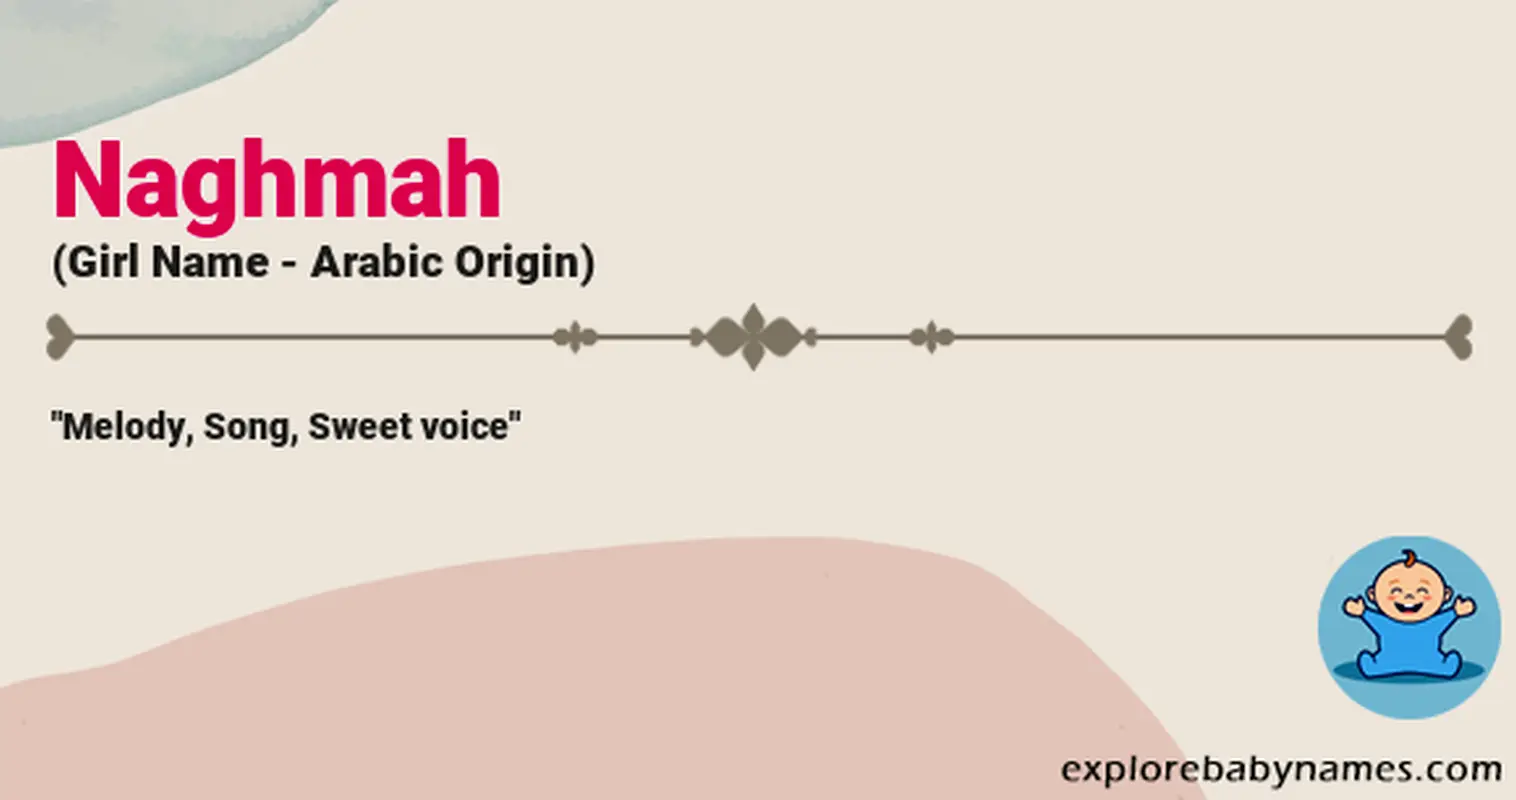 Meaning of Naghmah